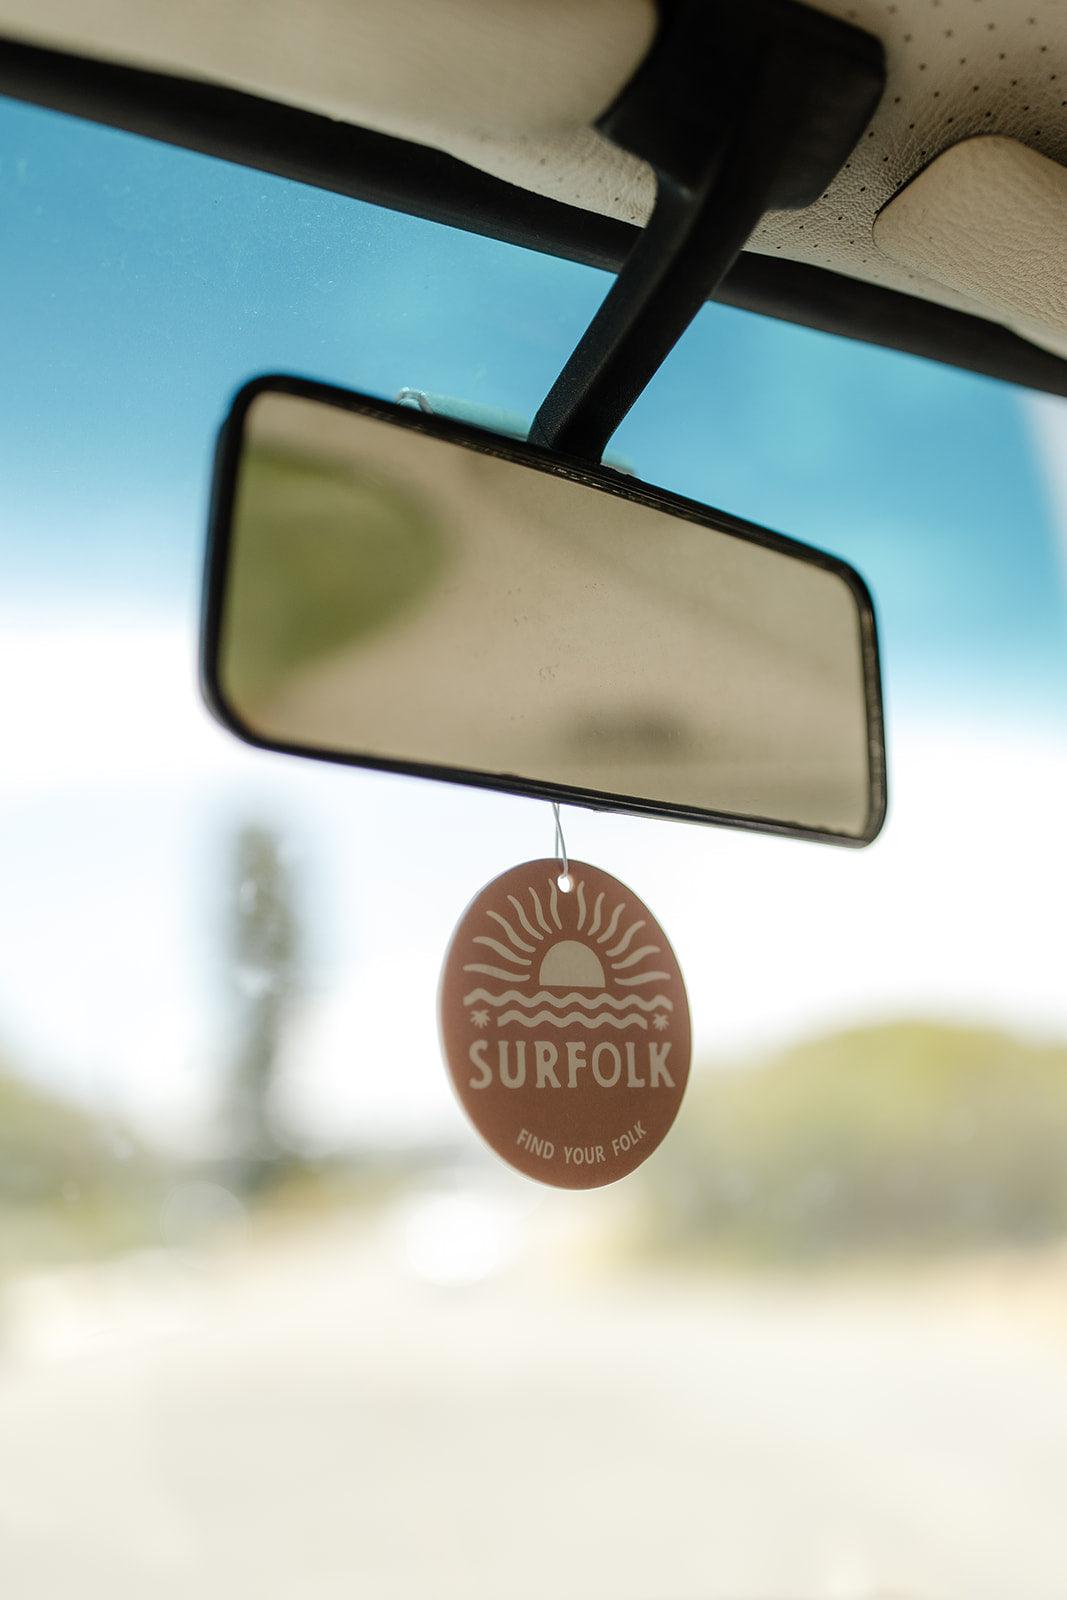 Coconut surf scented car air freshener for the van or 4WD to take on road trips hanging from rear vision mirror ready for road trips along the coast made from recyclable and sustainable materials find your folk.